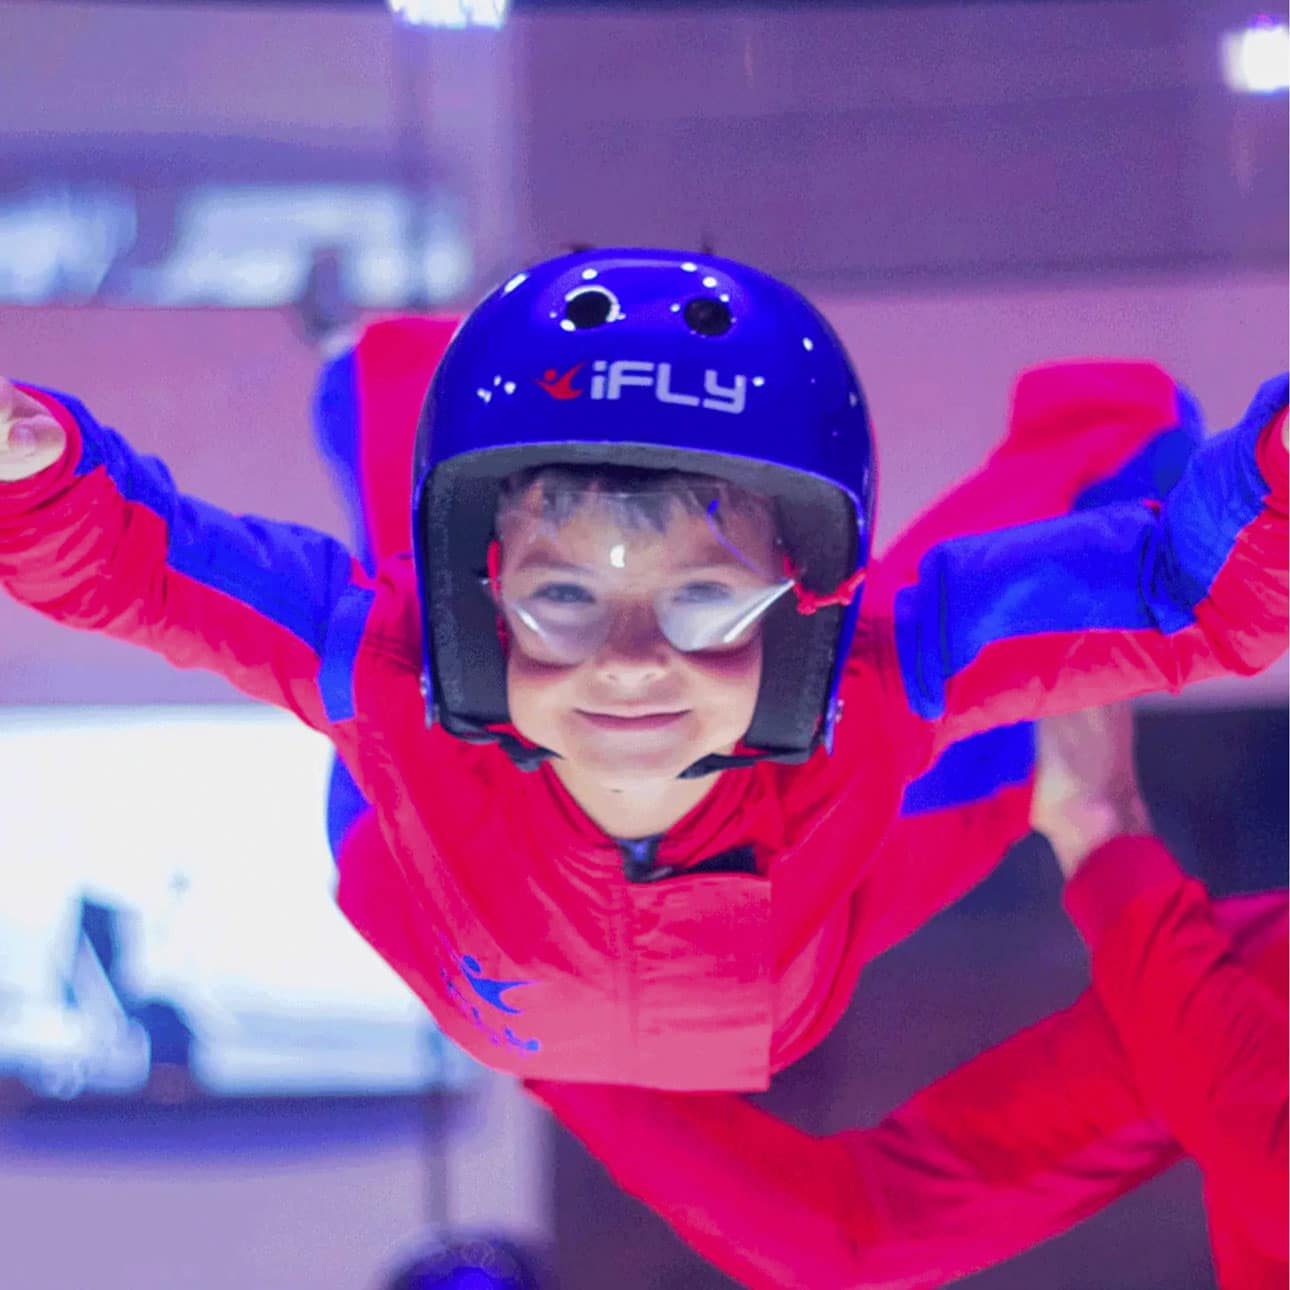 iFLY Black Friday Exclusive Package - Save up to 50%